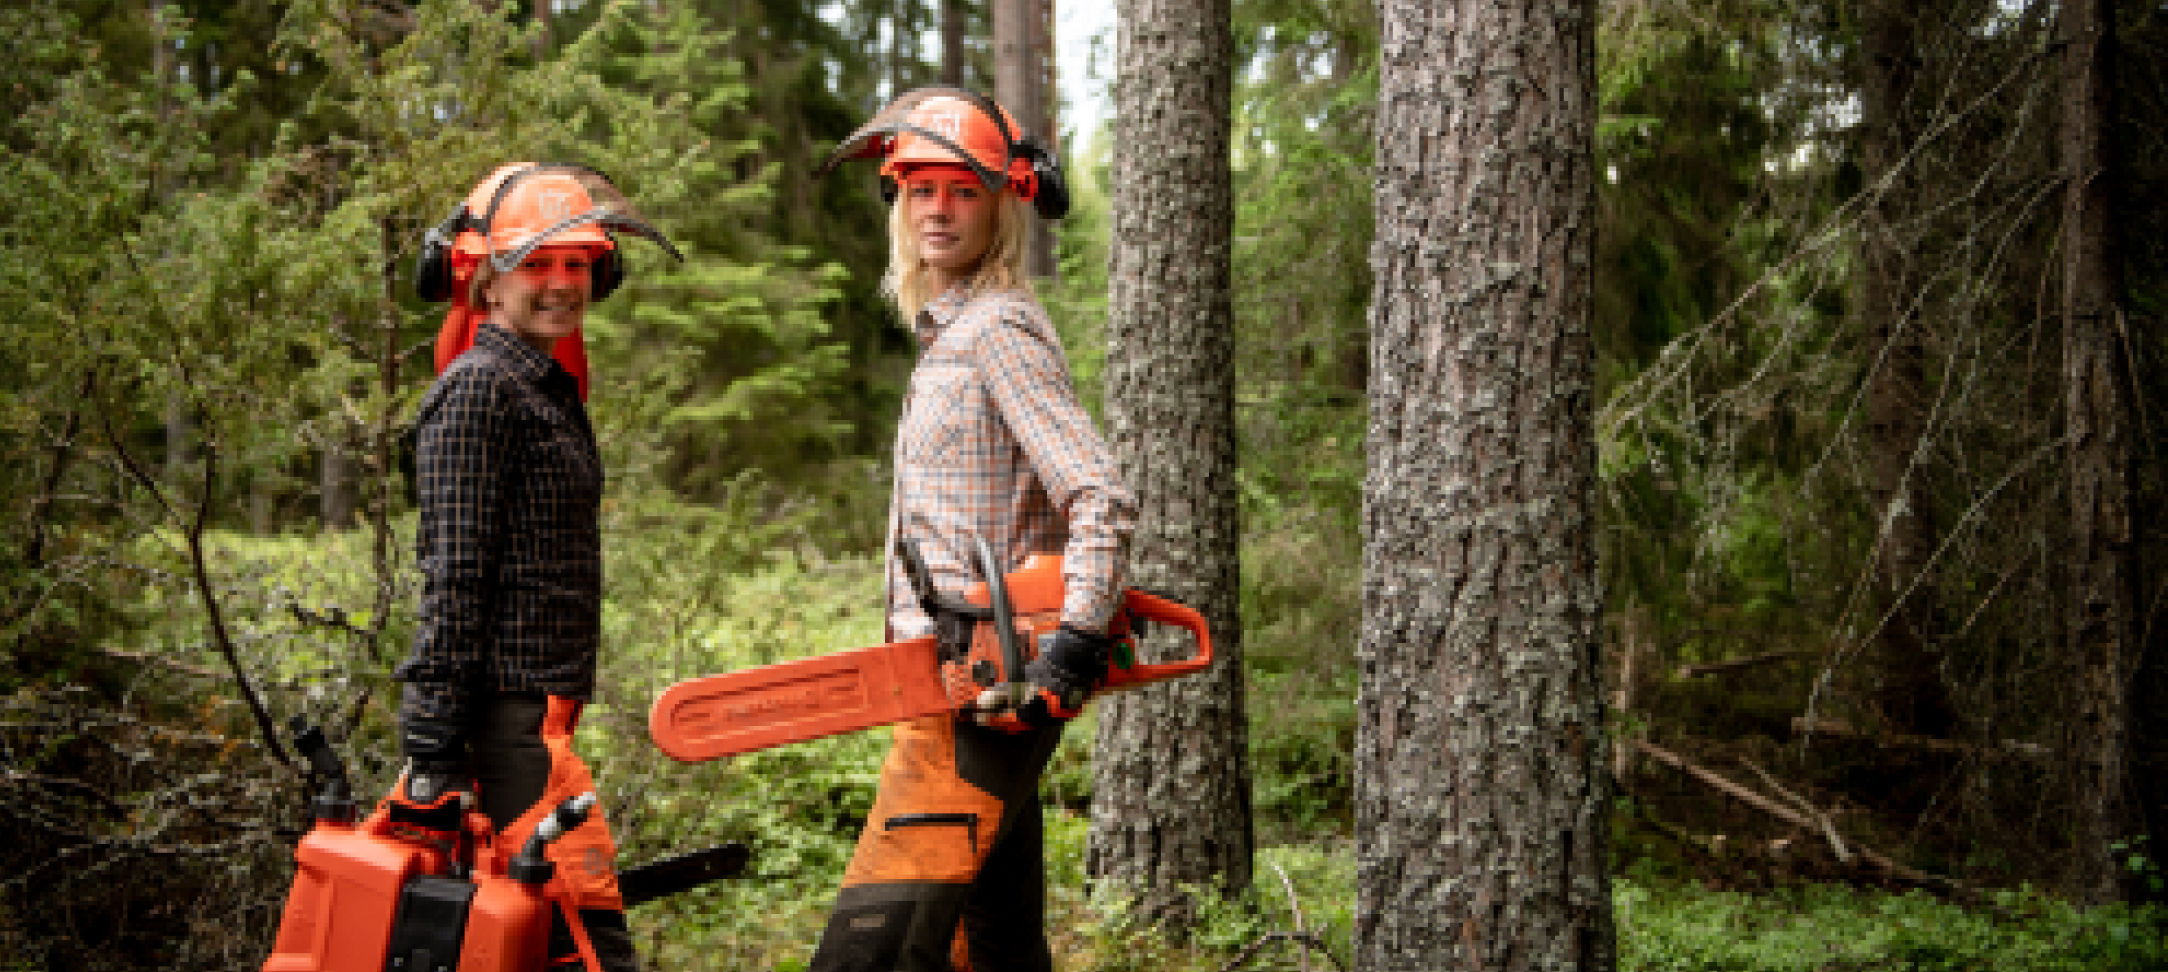 Two women standing in a forest carrying orange chainsaws